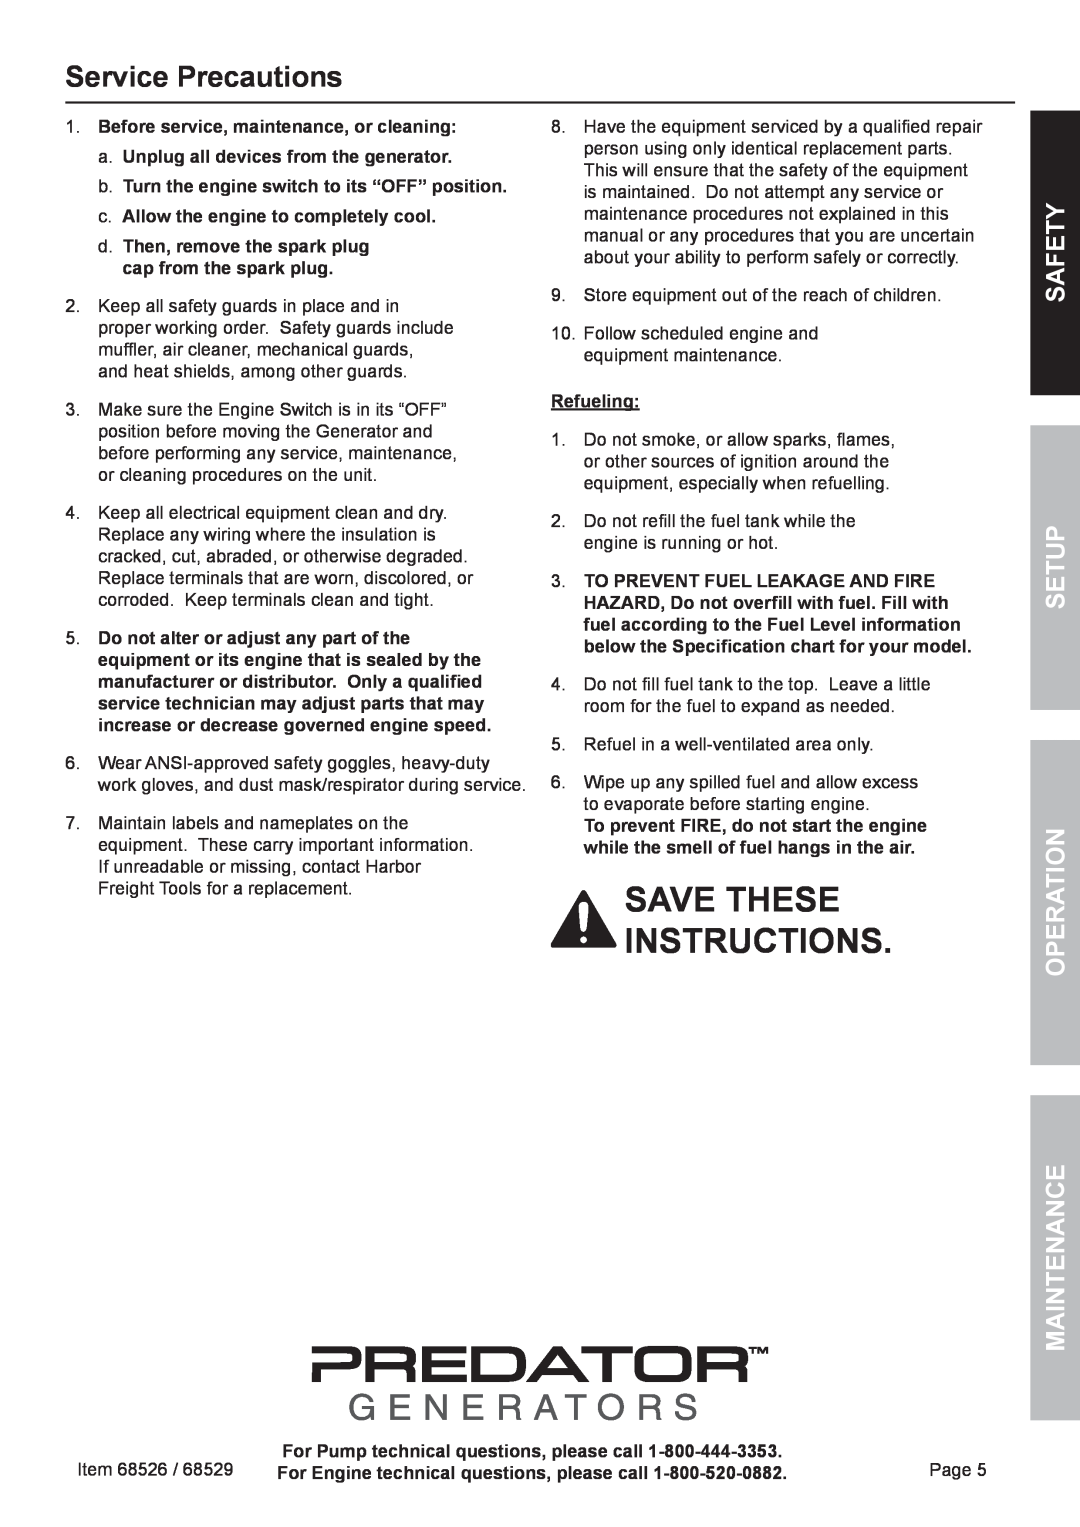 Harbor Freight Tools 68526 owner manual Save these instructions, Service Precautions, Safety, Setup Operation Maintenance 